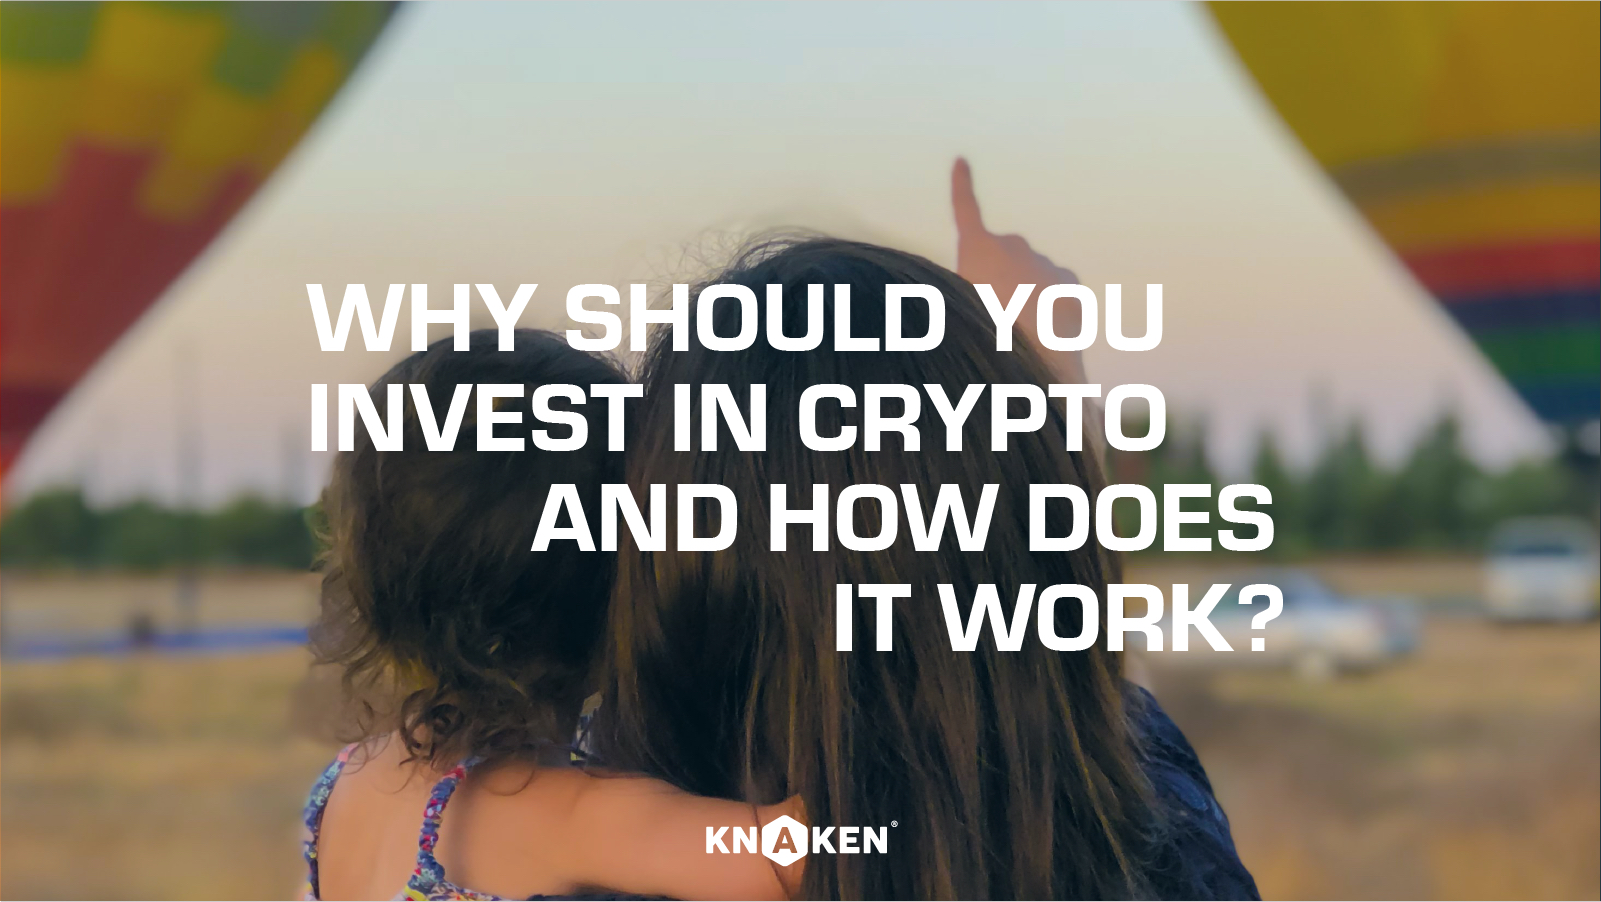 Why should you invest in crypto en how does it work?